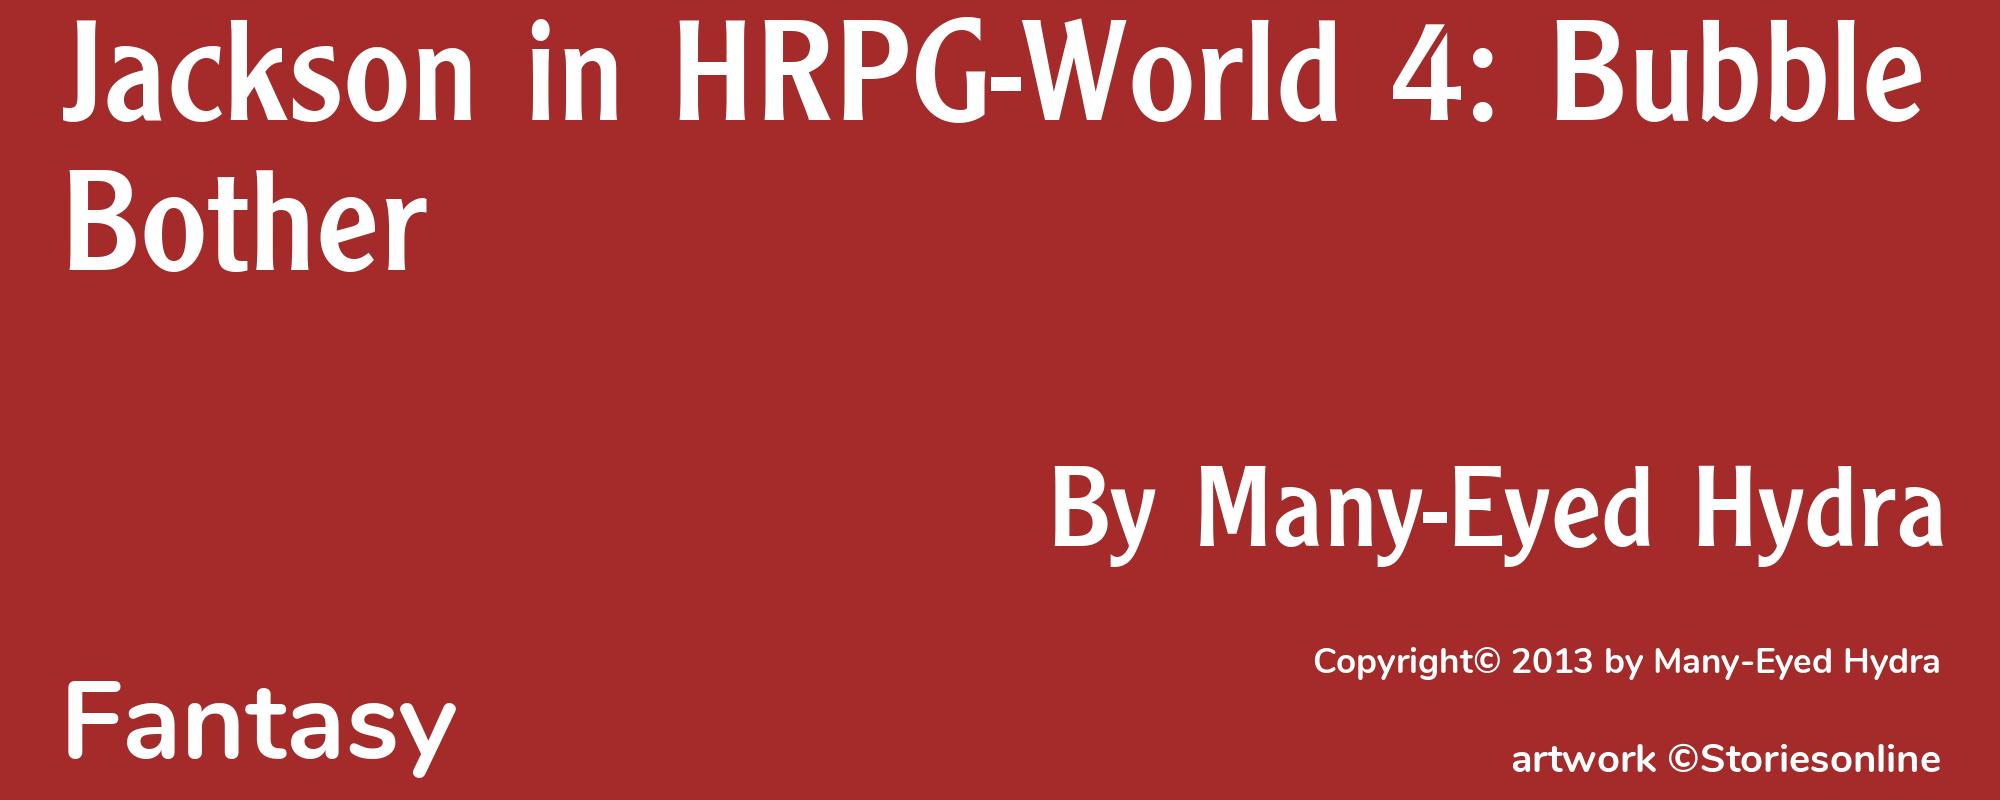 Jackson in HRPG-World 4: Bubble Bother - Cover